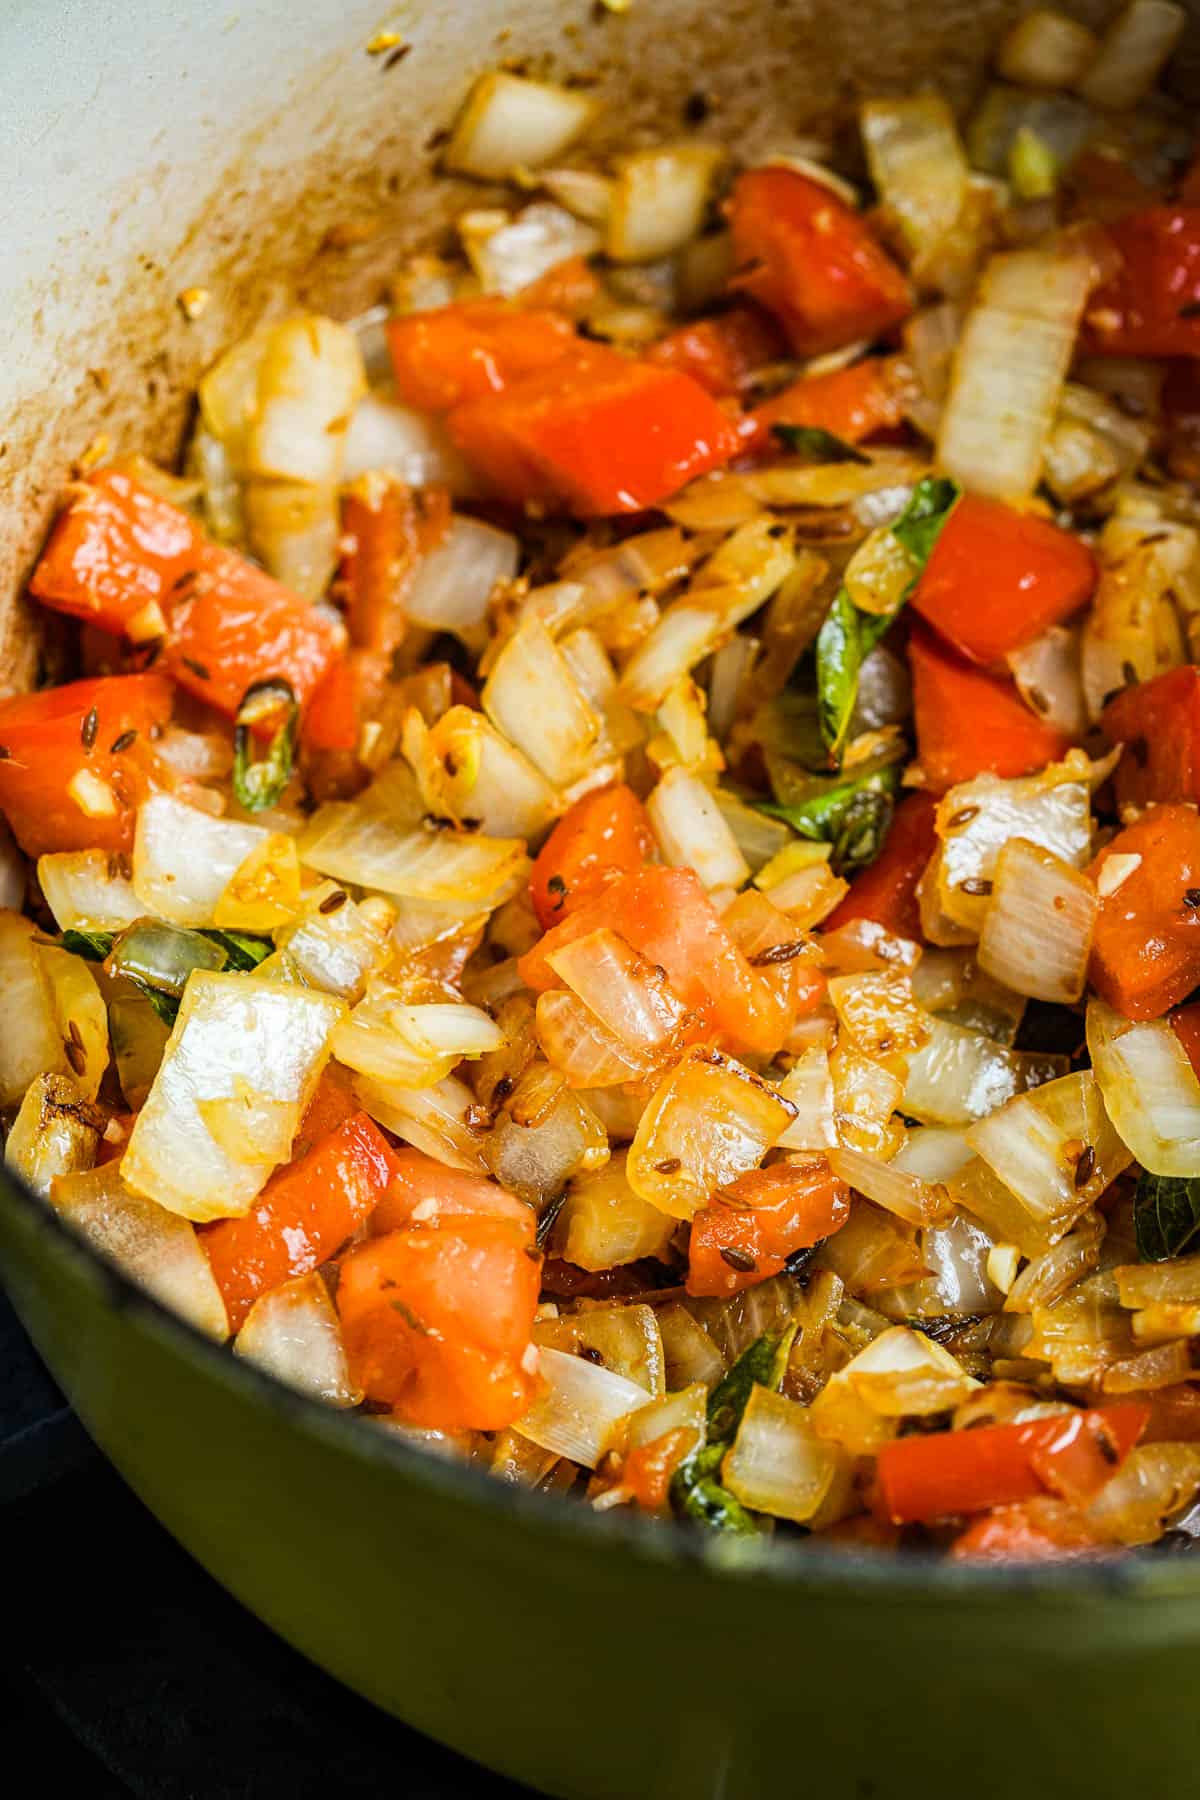 A pan with onions, tomatoes, and seasonings cooking in it.